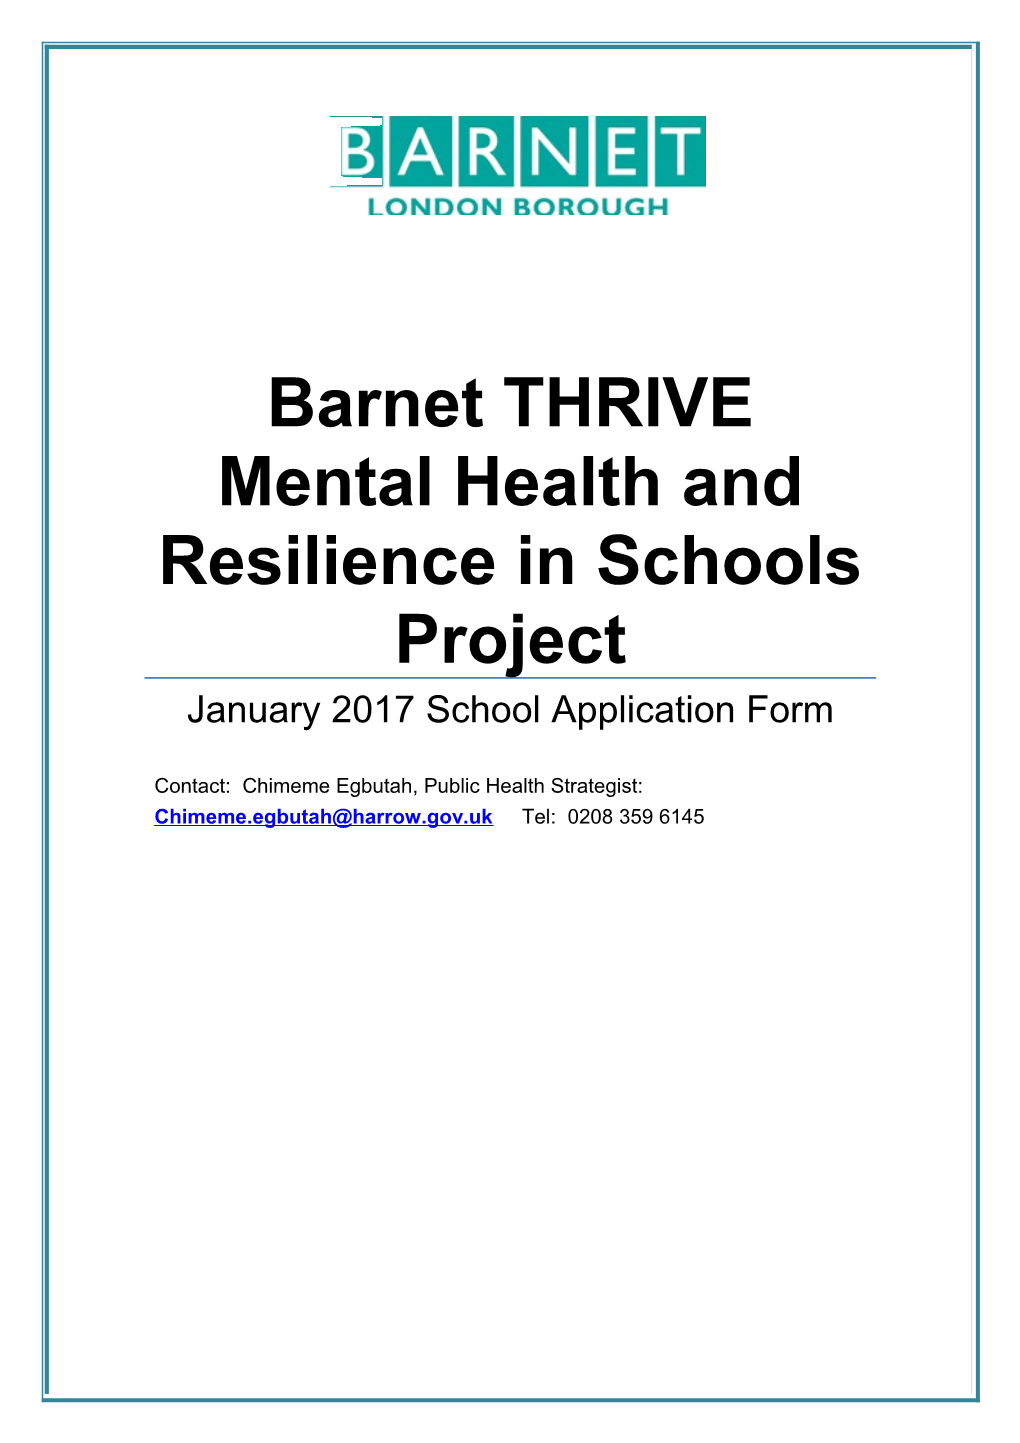 Barnet THRIVE Mental Health and Resilience in Schools Project